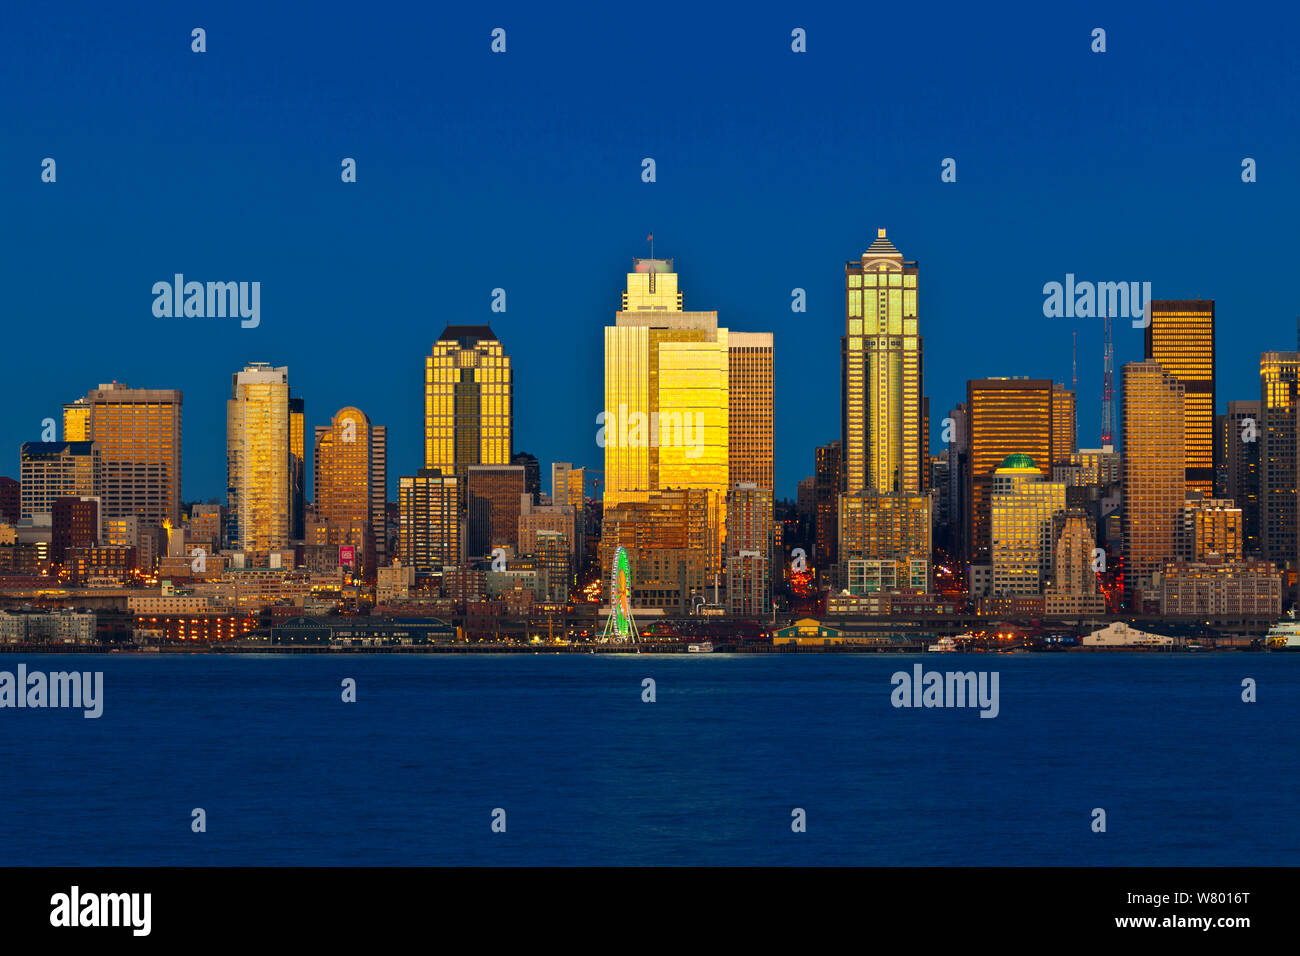 Sunset reflected  off  skyscrapers, viewed from across Elliott Bay, West Seattle, Washington, USA. December 2014. Stock Photo